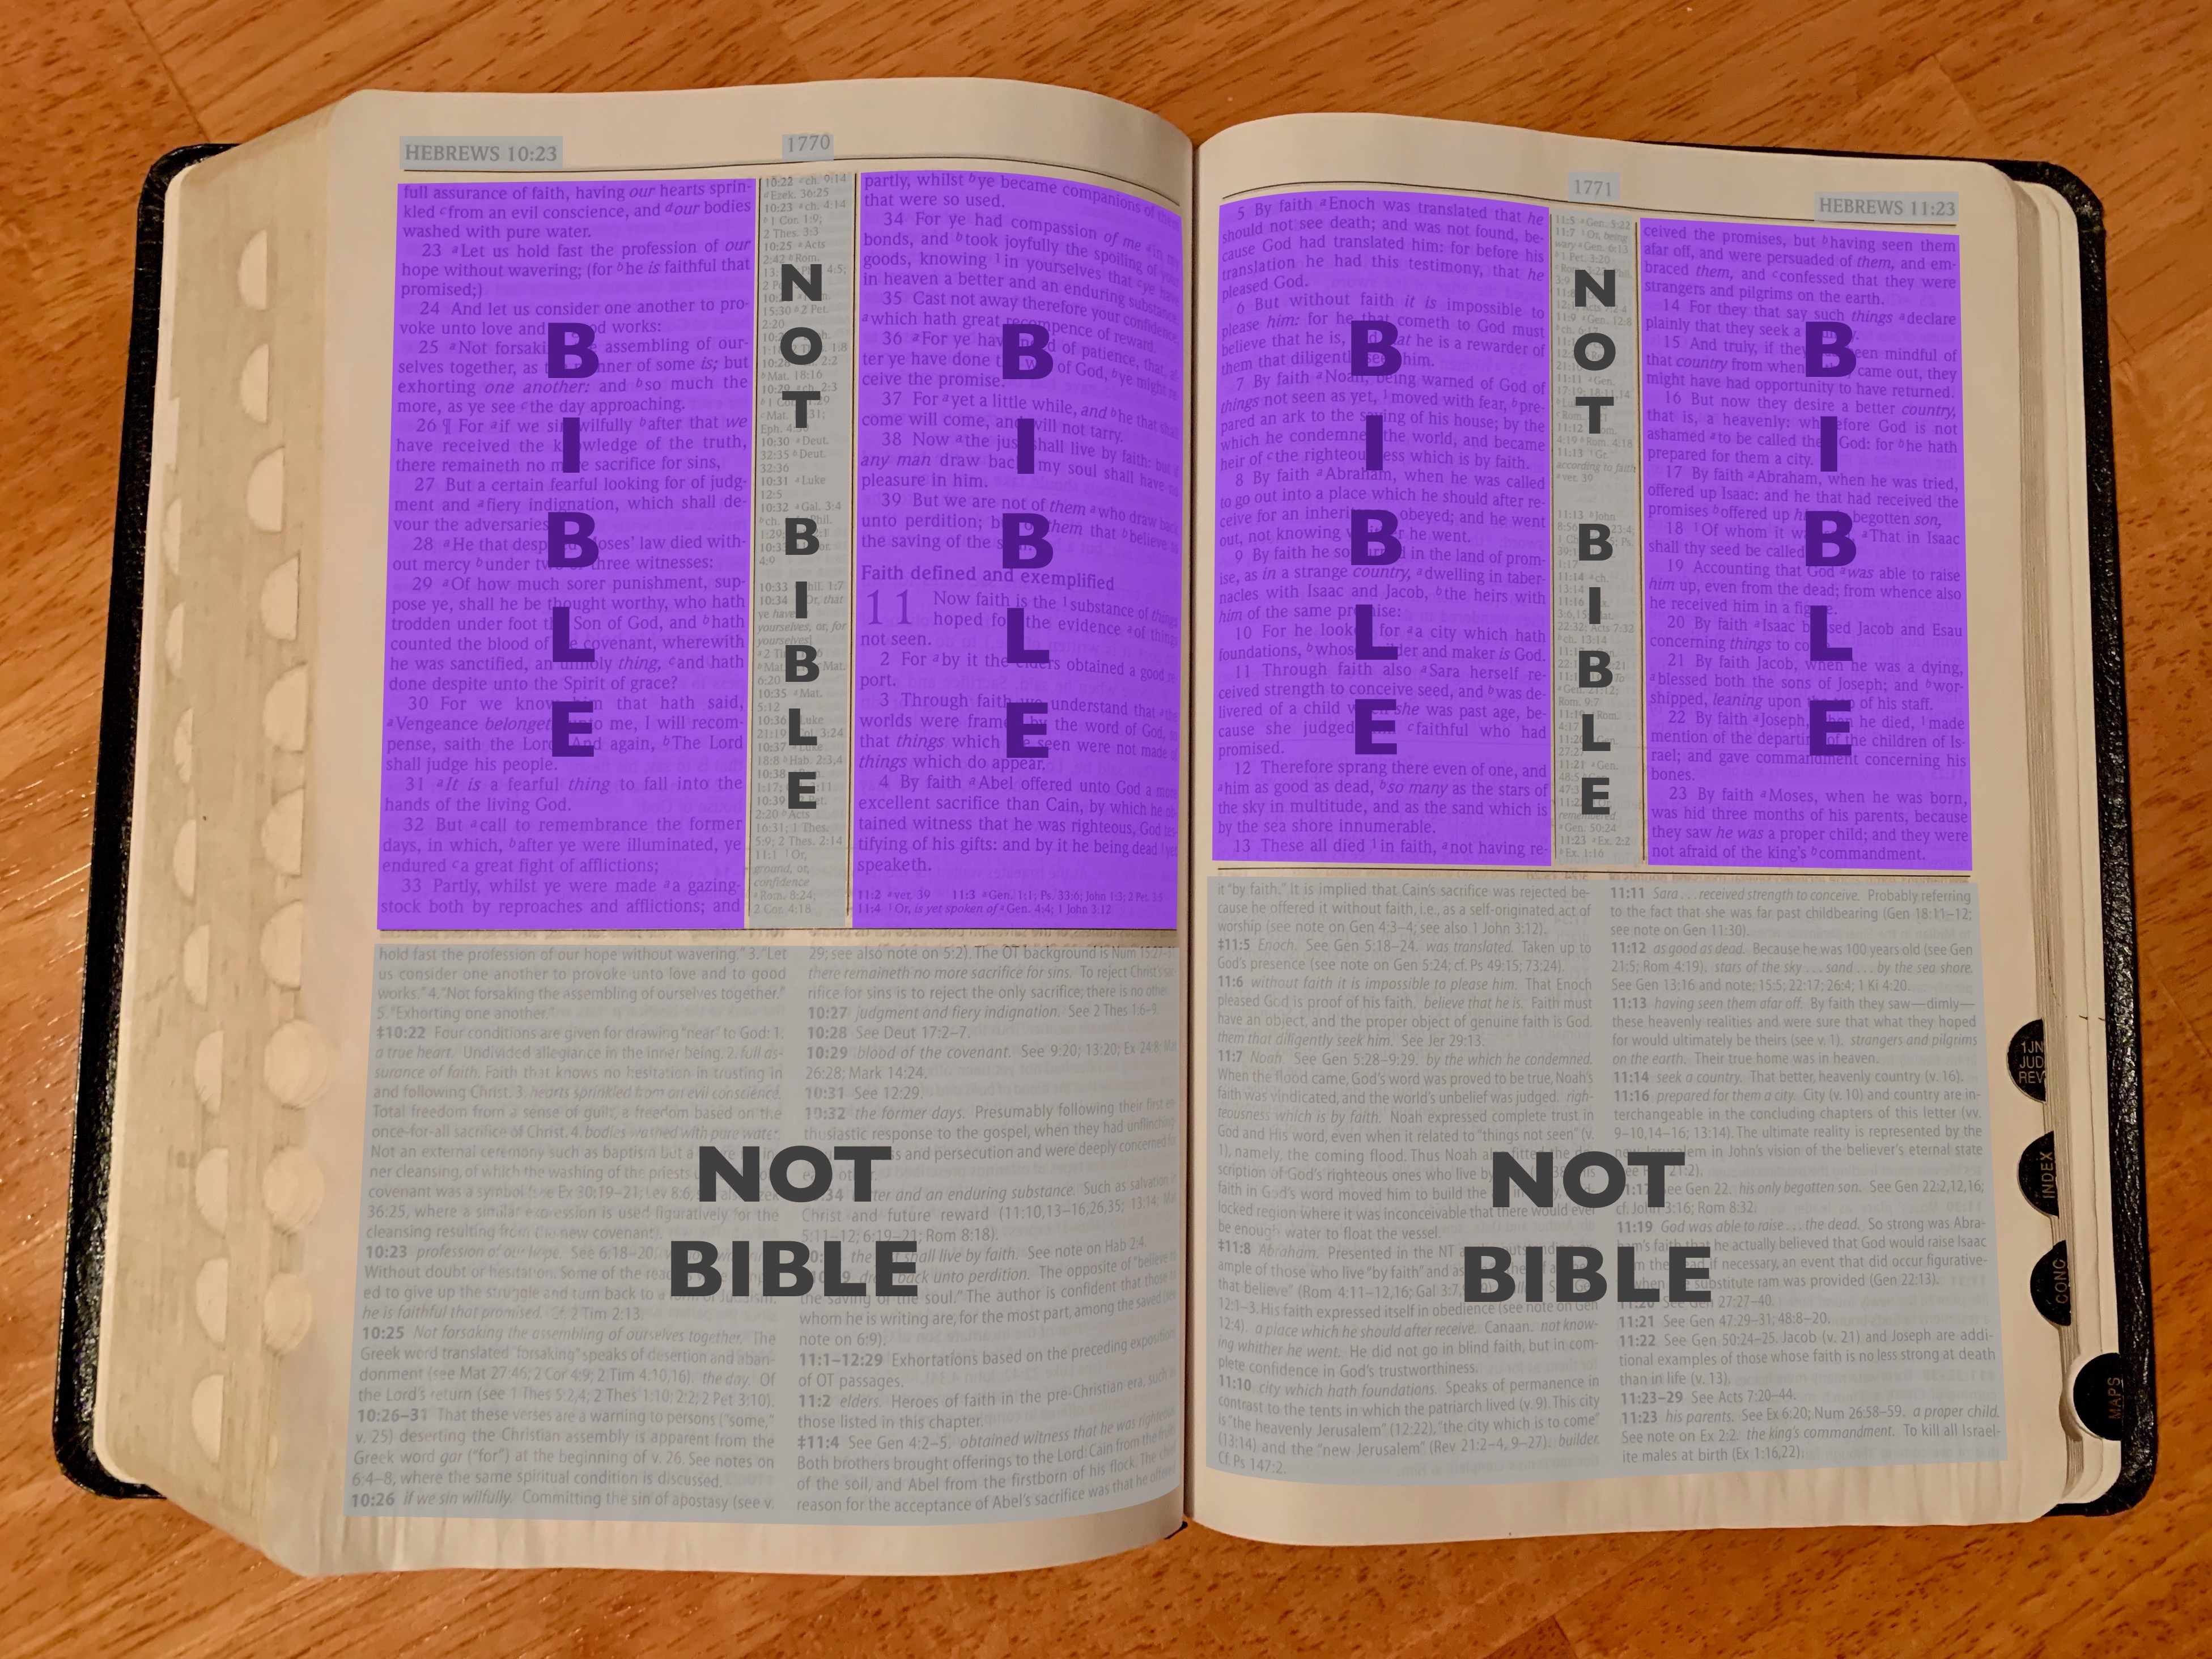 KJV study Bible with scripture highlighted in purple and notes highlighted in gray.